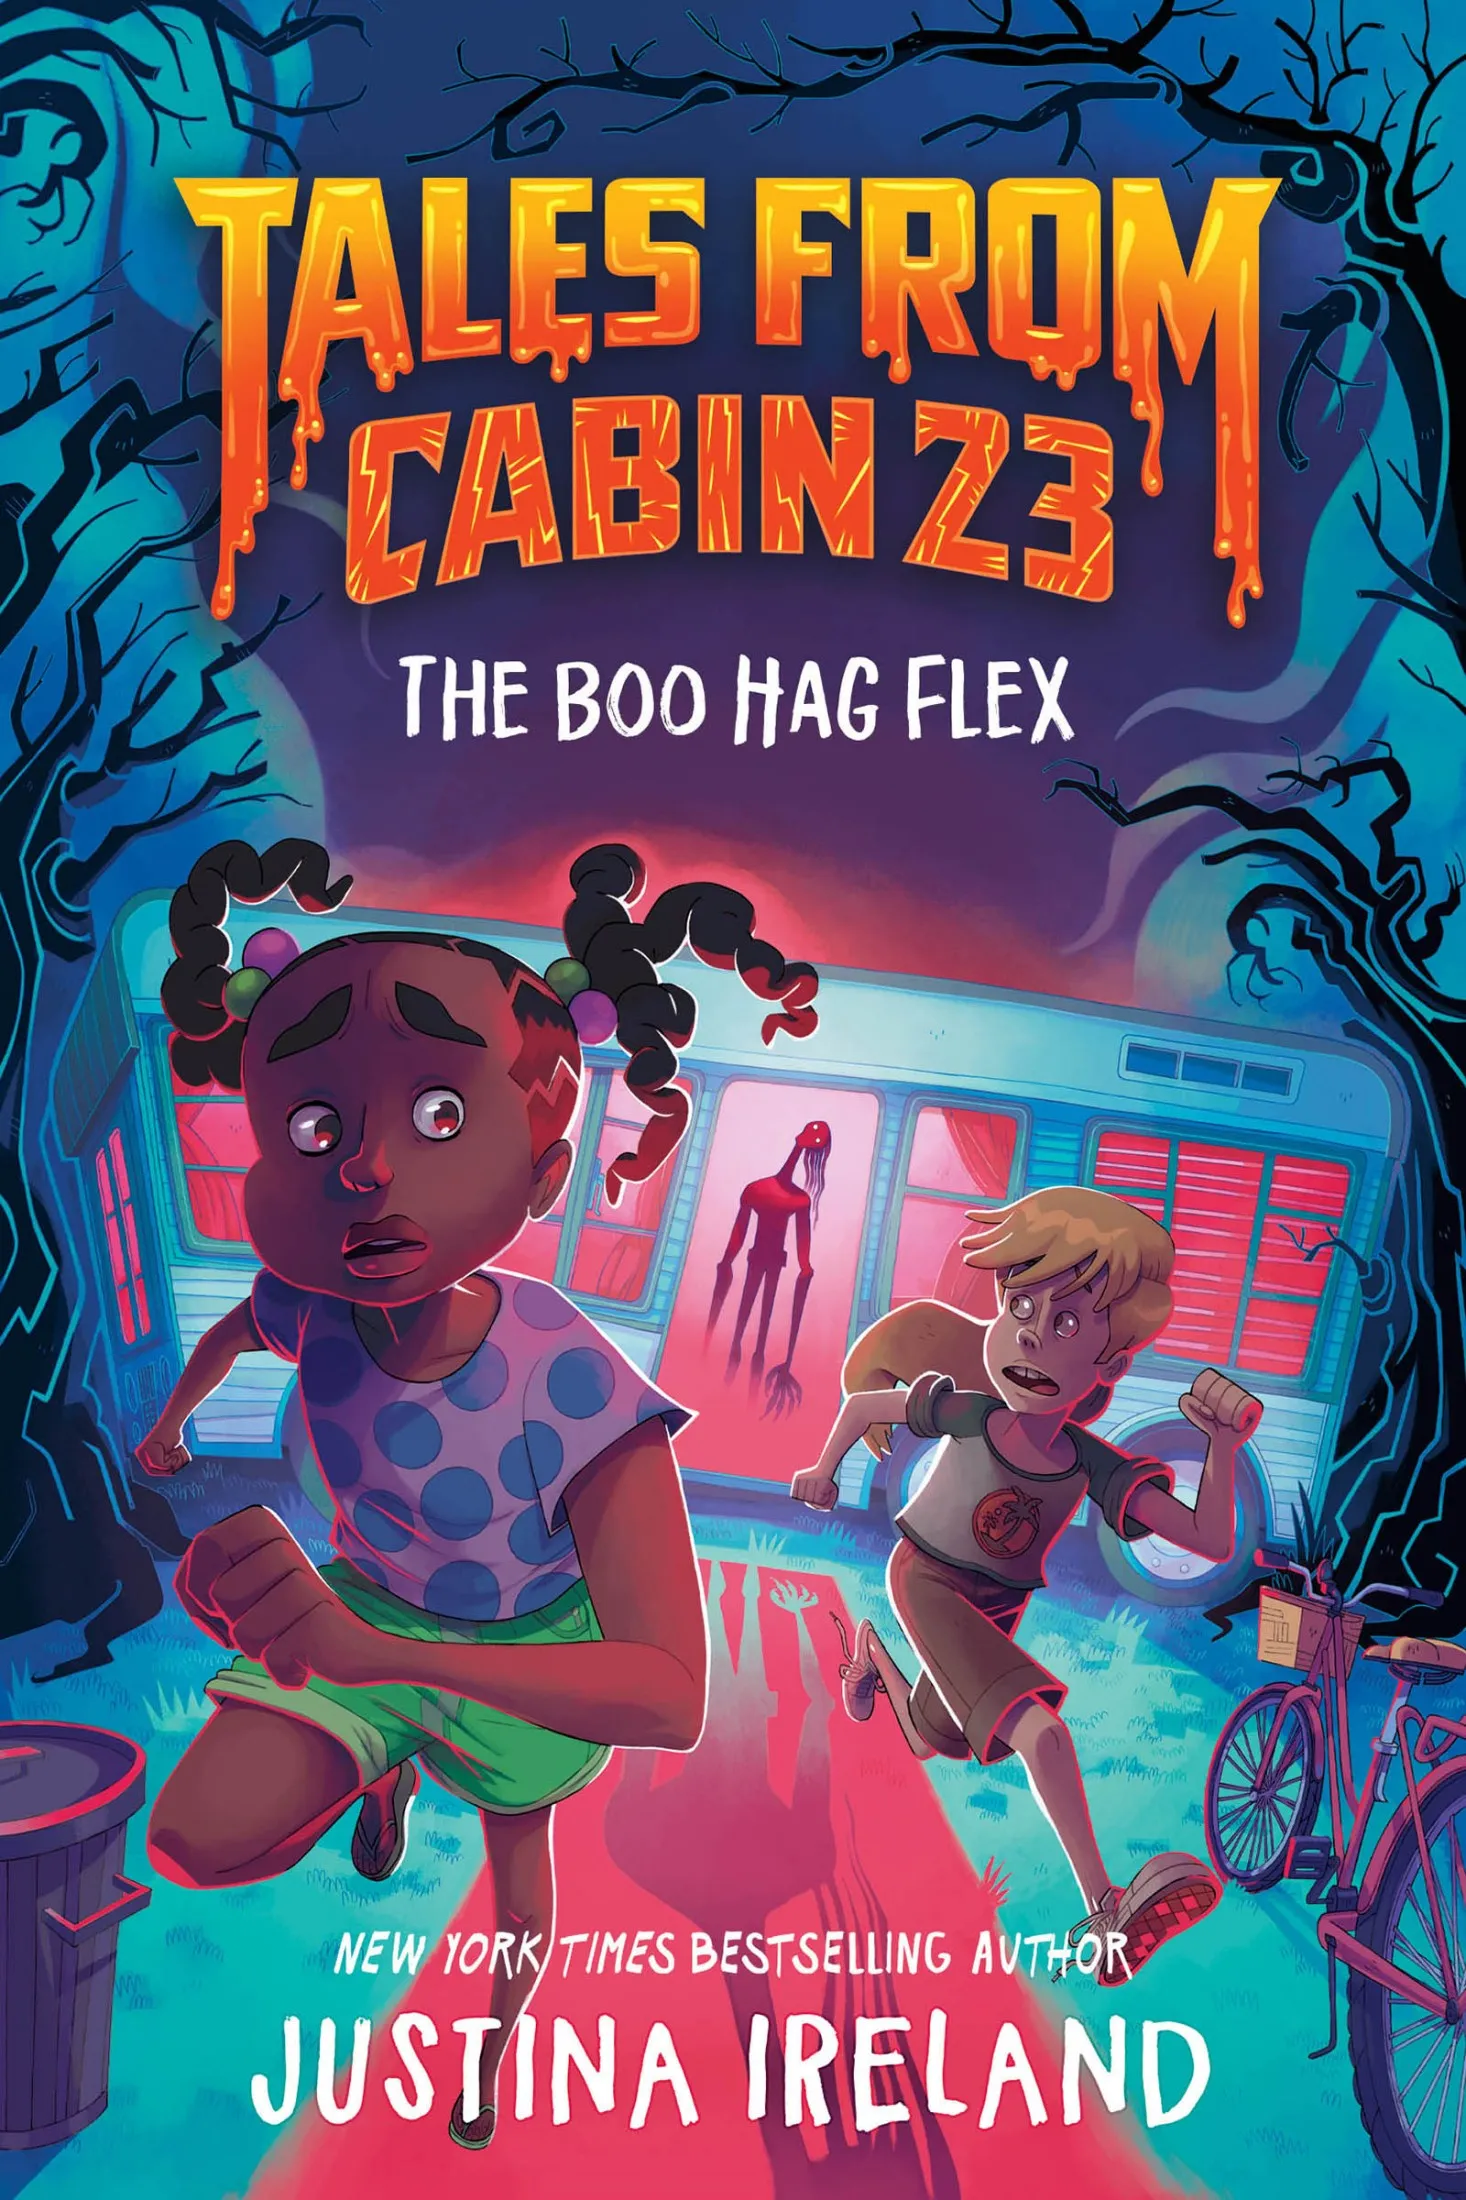 The Boo Hag Flex (Tales From Cabin 23 #1)